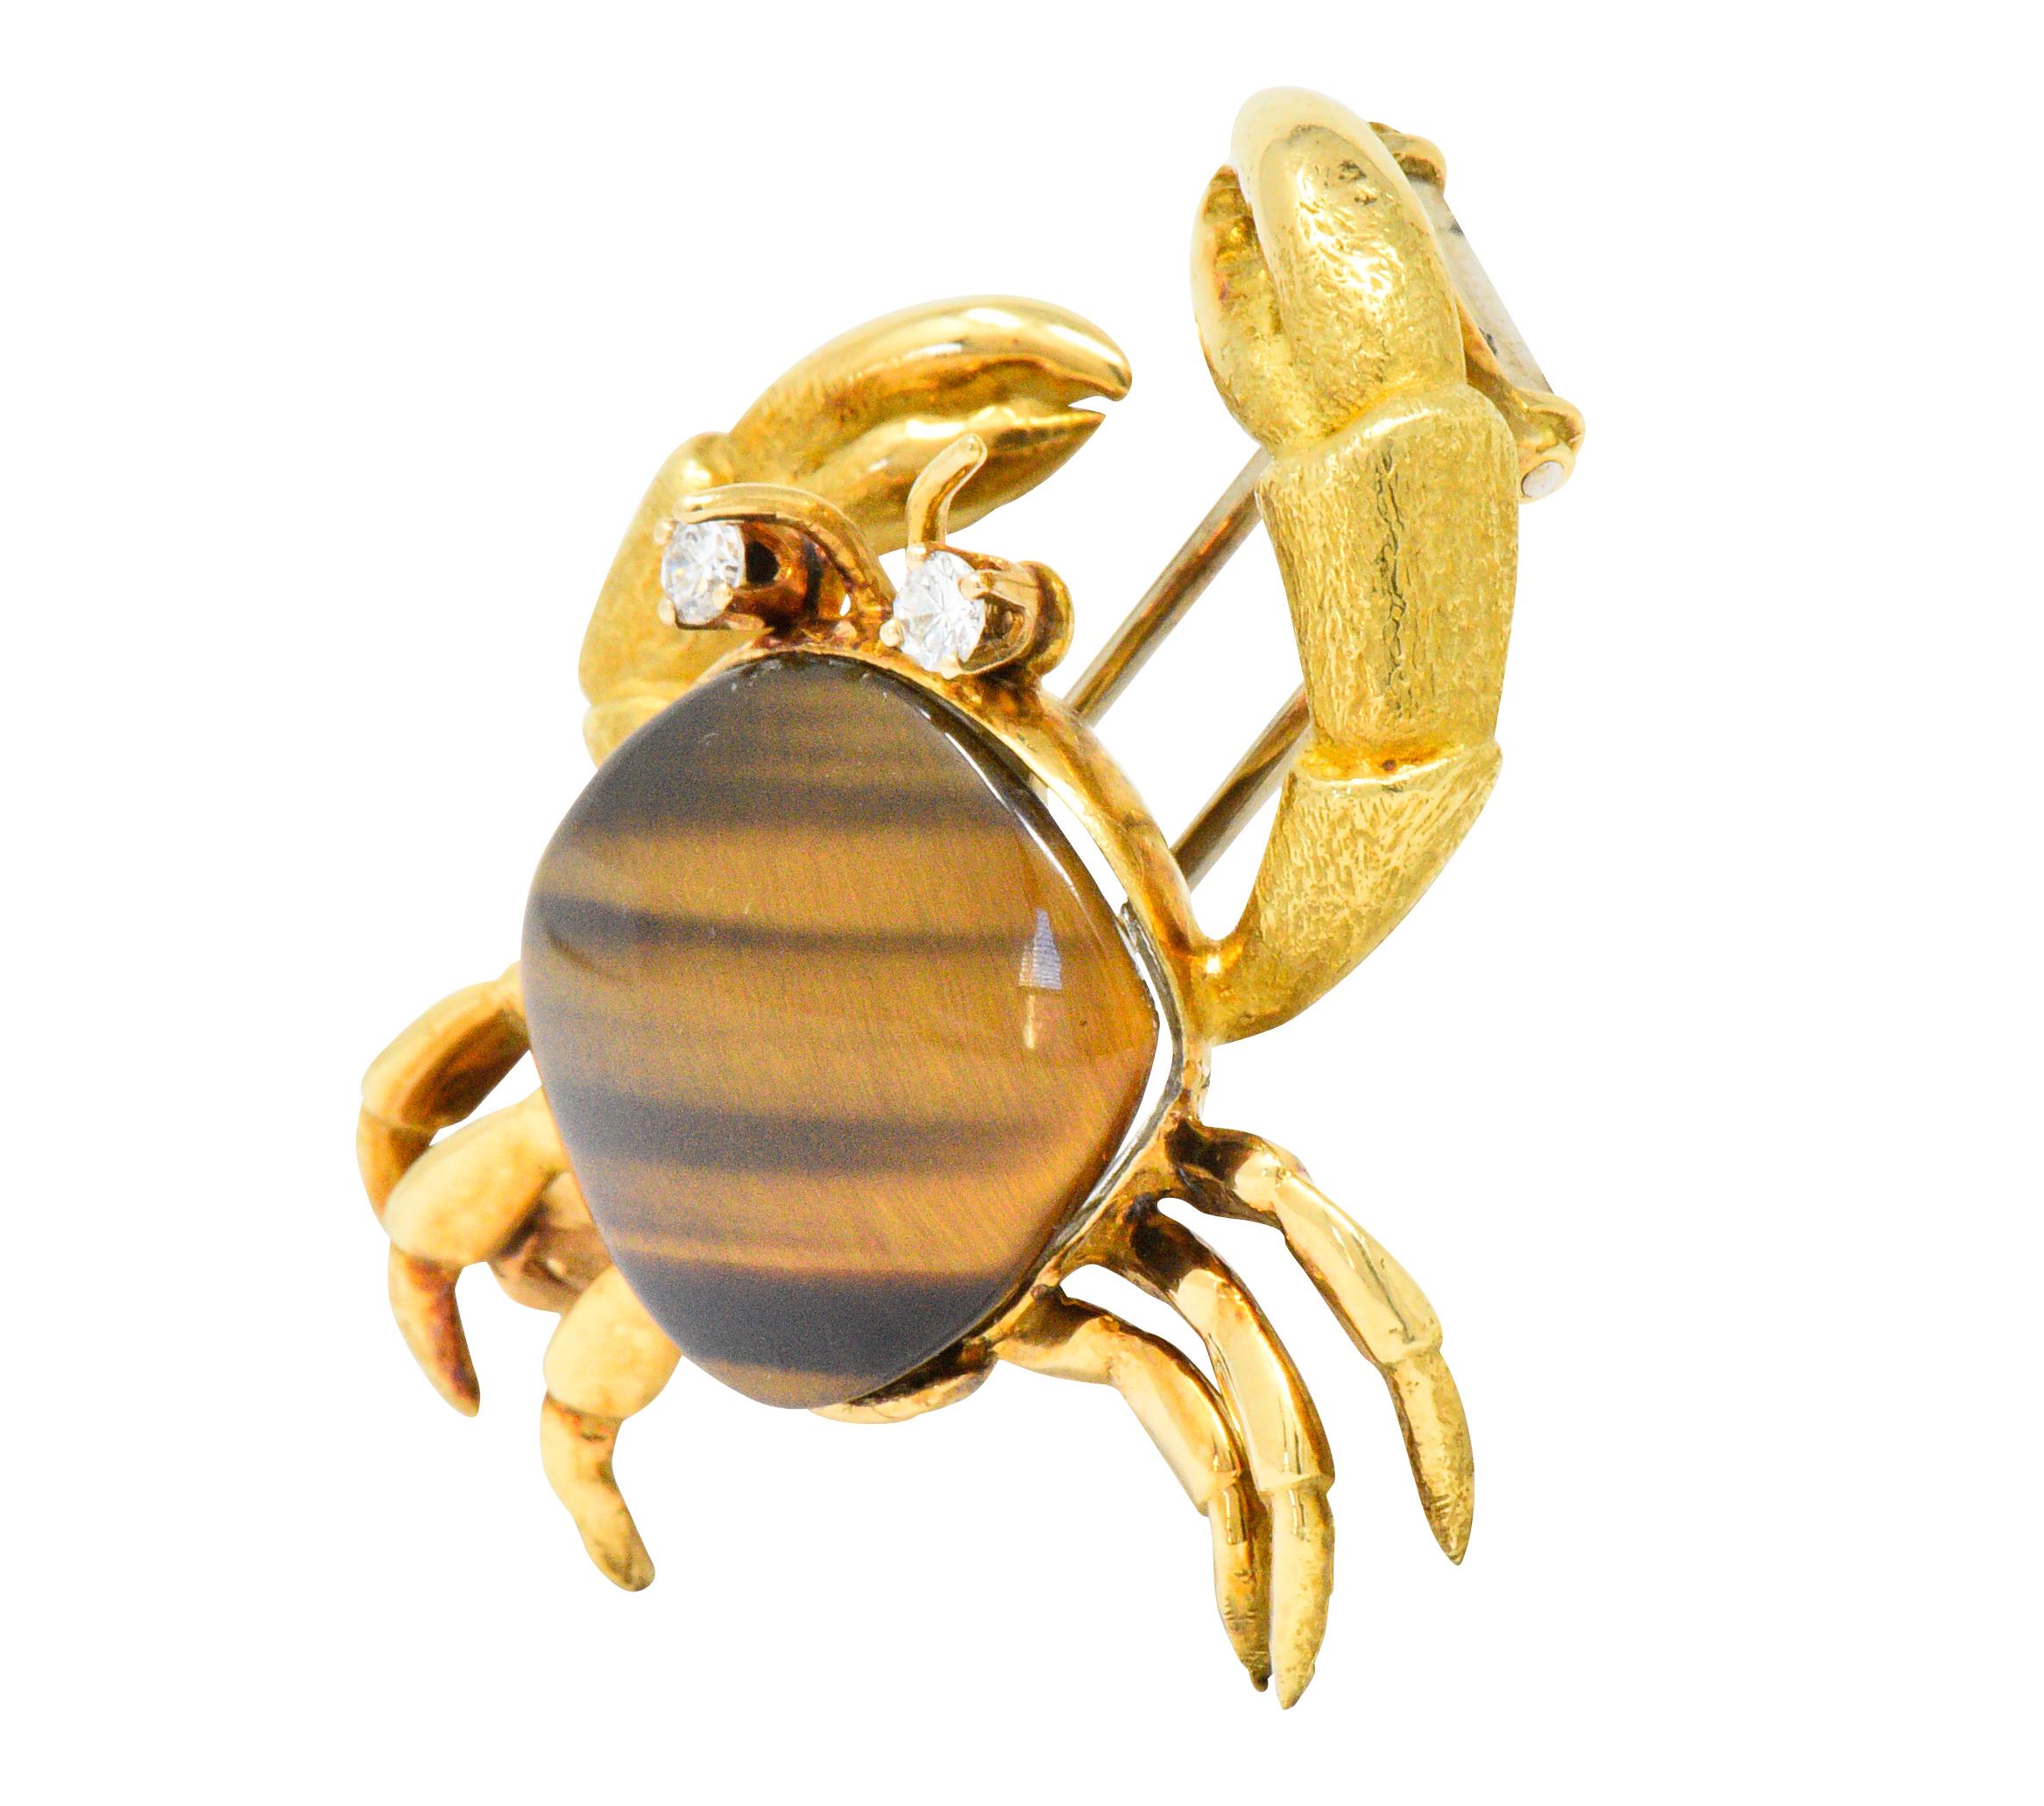 Featuring a dimensional crab design with an 18kt gold foundation depicting textured claws and 6 back legs

Two prong set round brilliant diamond eyes weighing 0.14 carat, eye clean and bright

Body centers a rounded triangular and bezel set cabochon